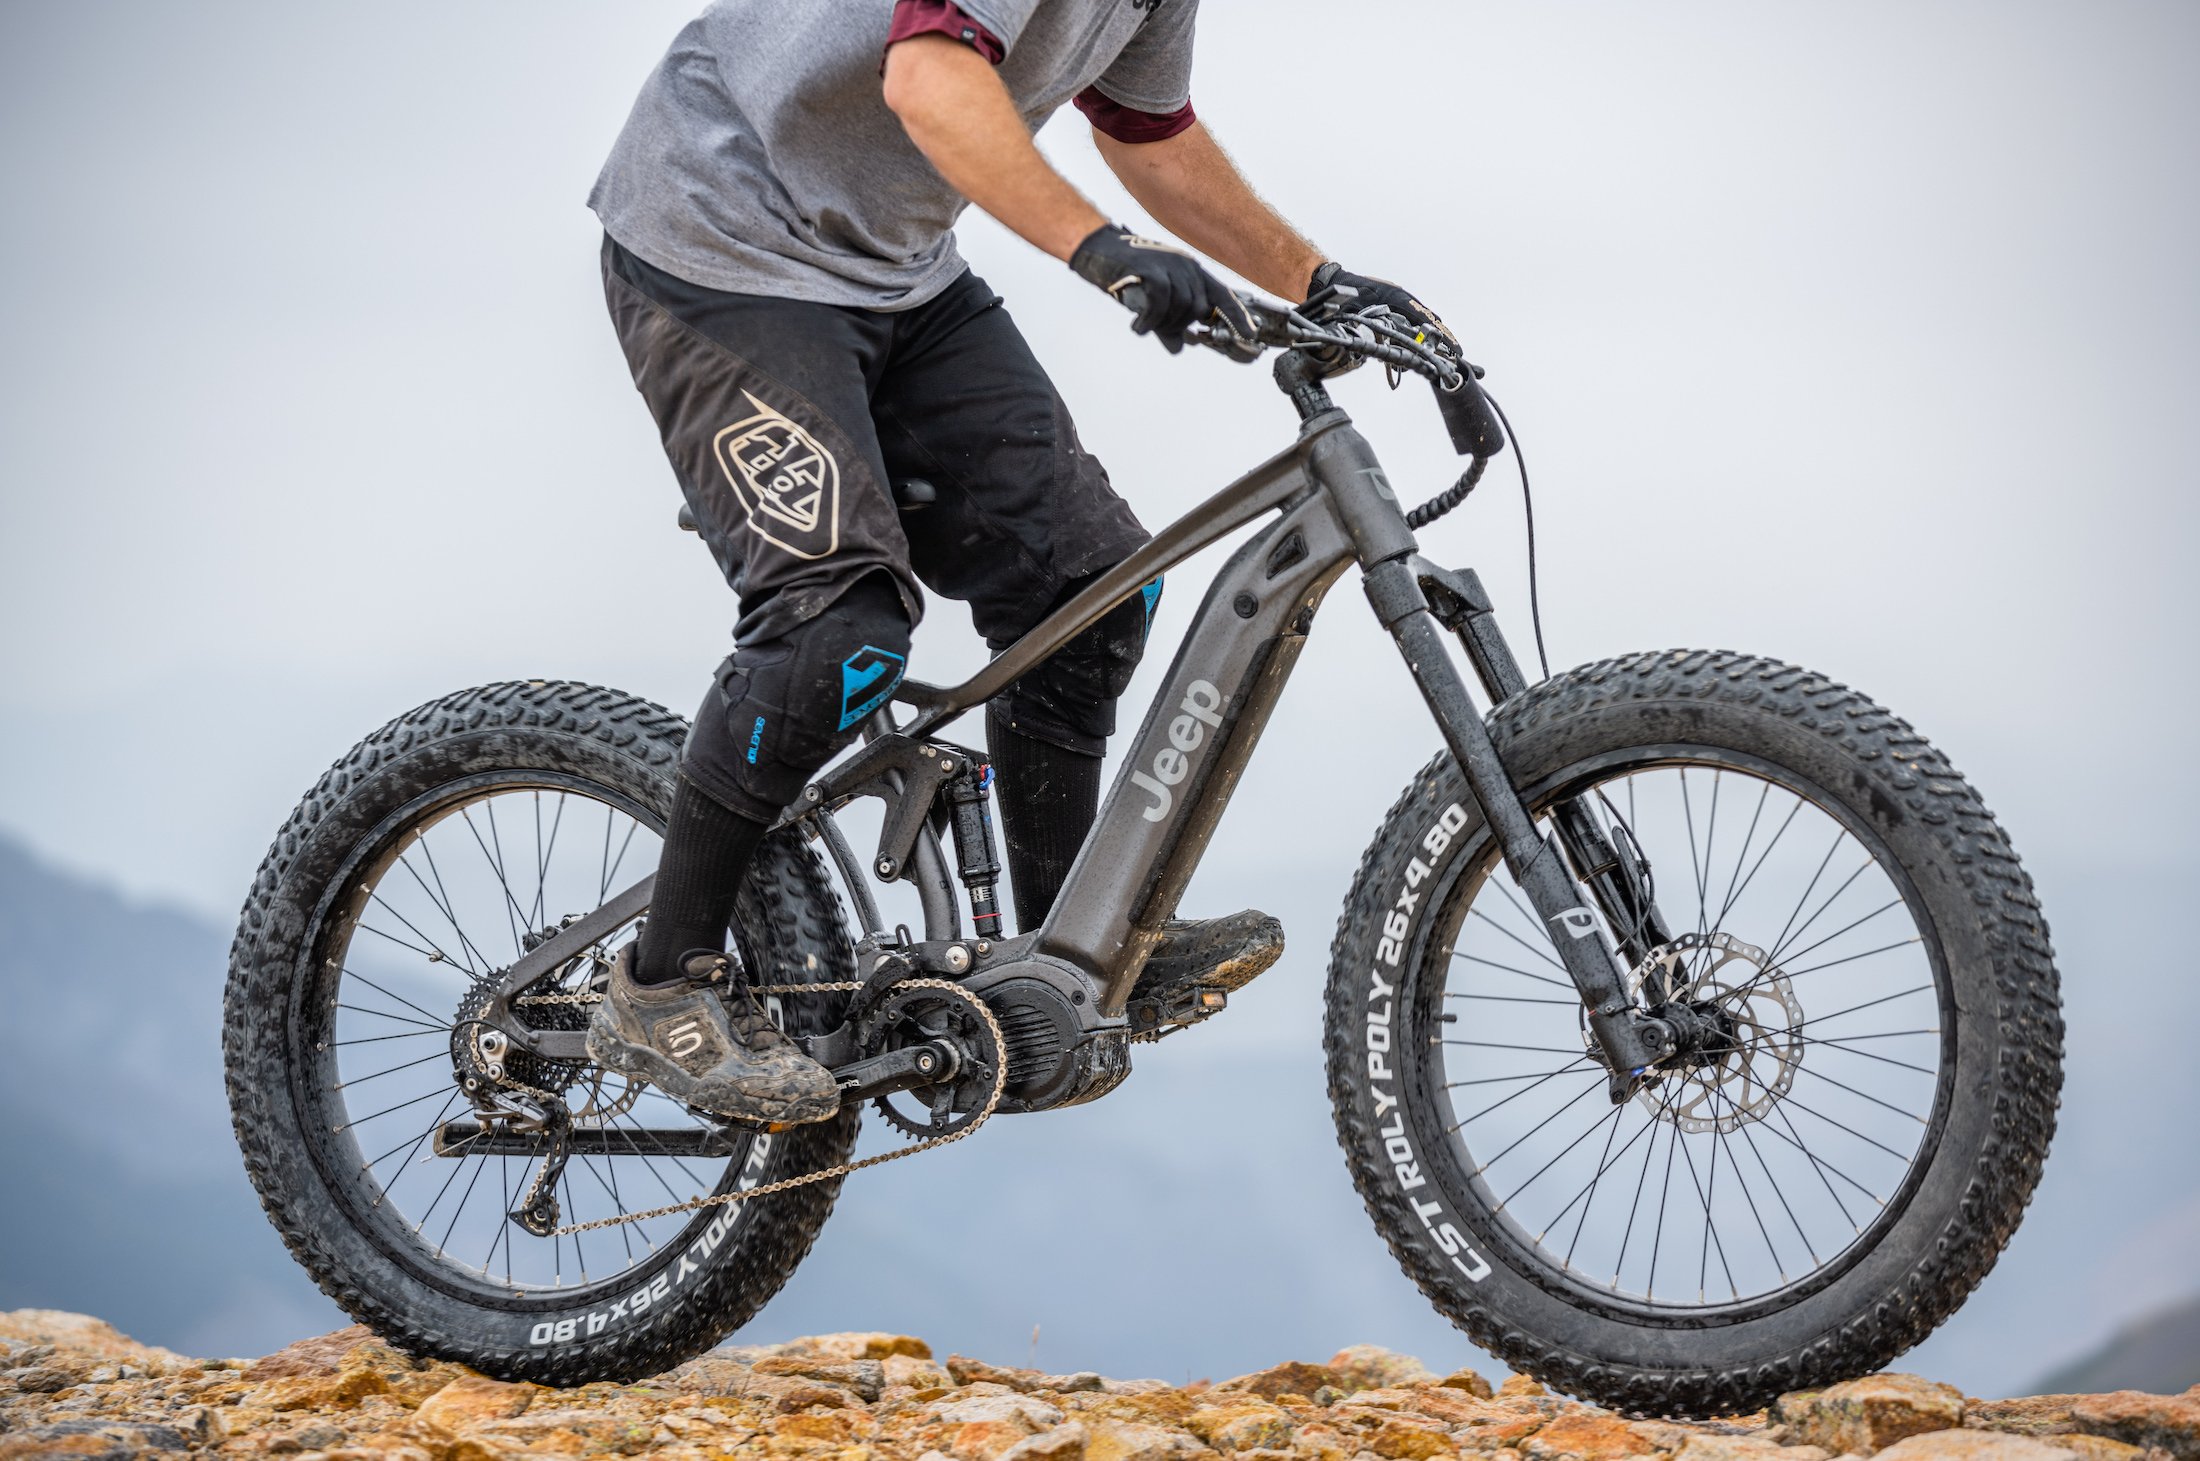 temperen timmerman Gering The Jeep Fat Tire E-Bike: An Off-Road Alternative To ATVs